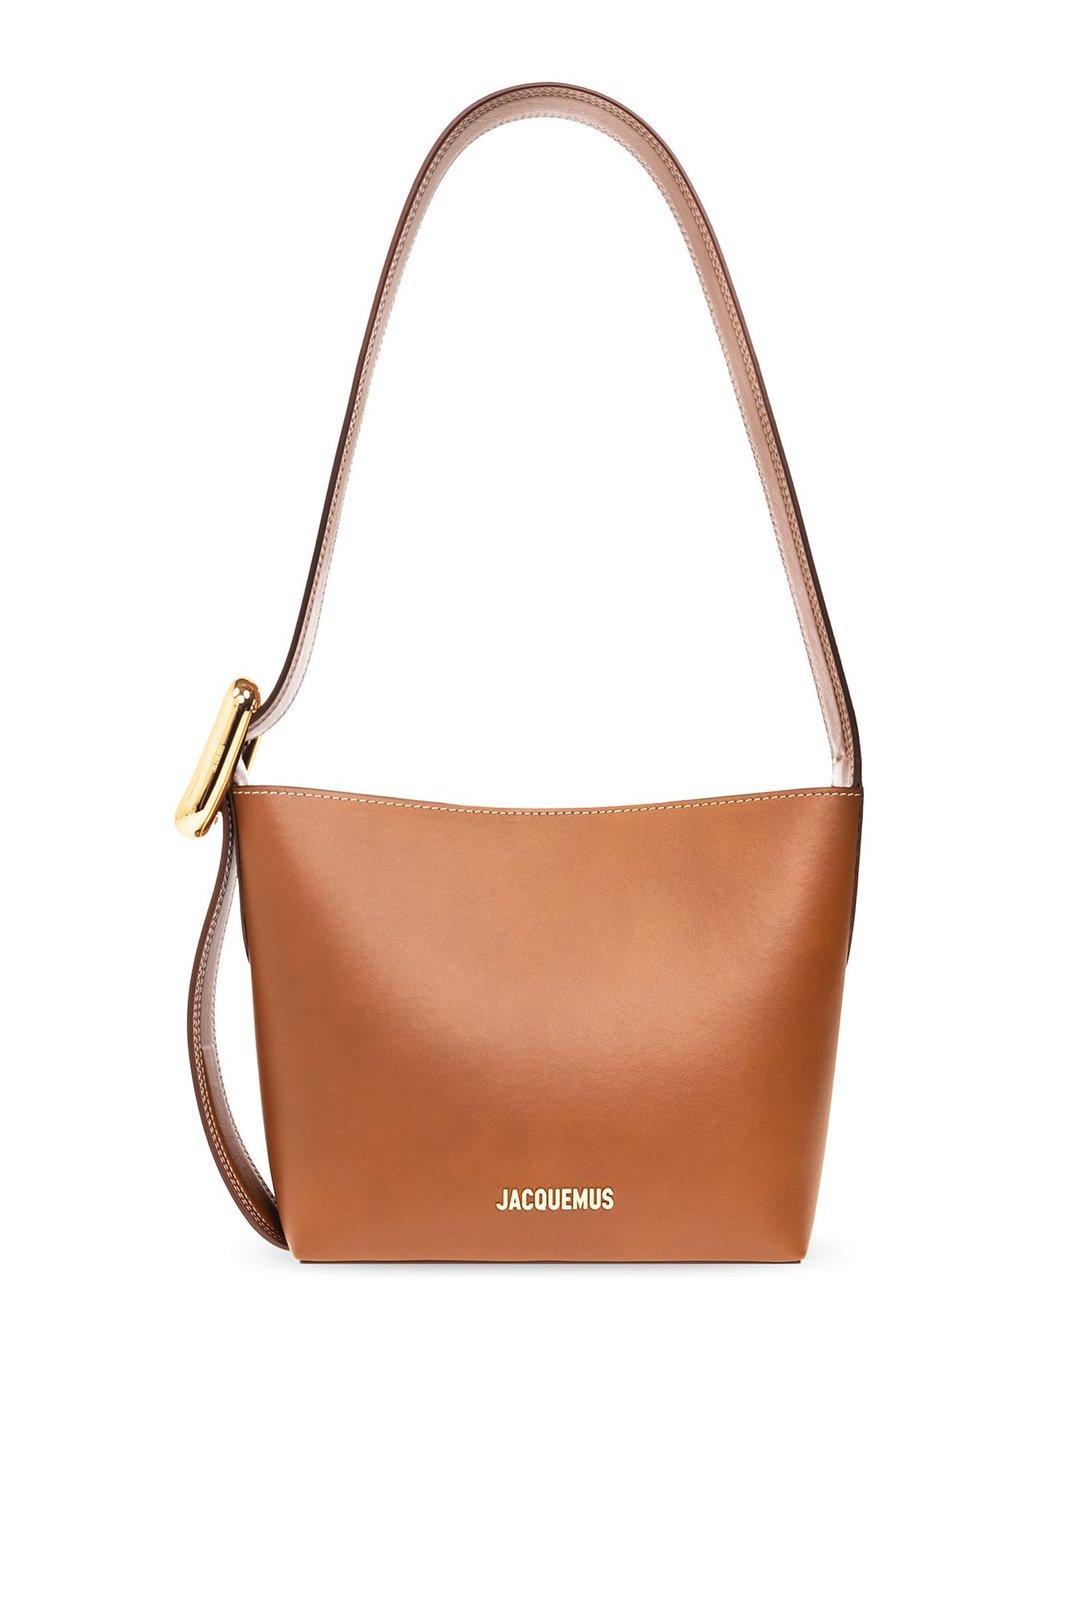 JACQUEMUS BUCKLED SMALL BUCKET BAG